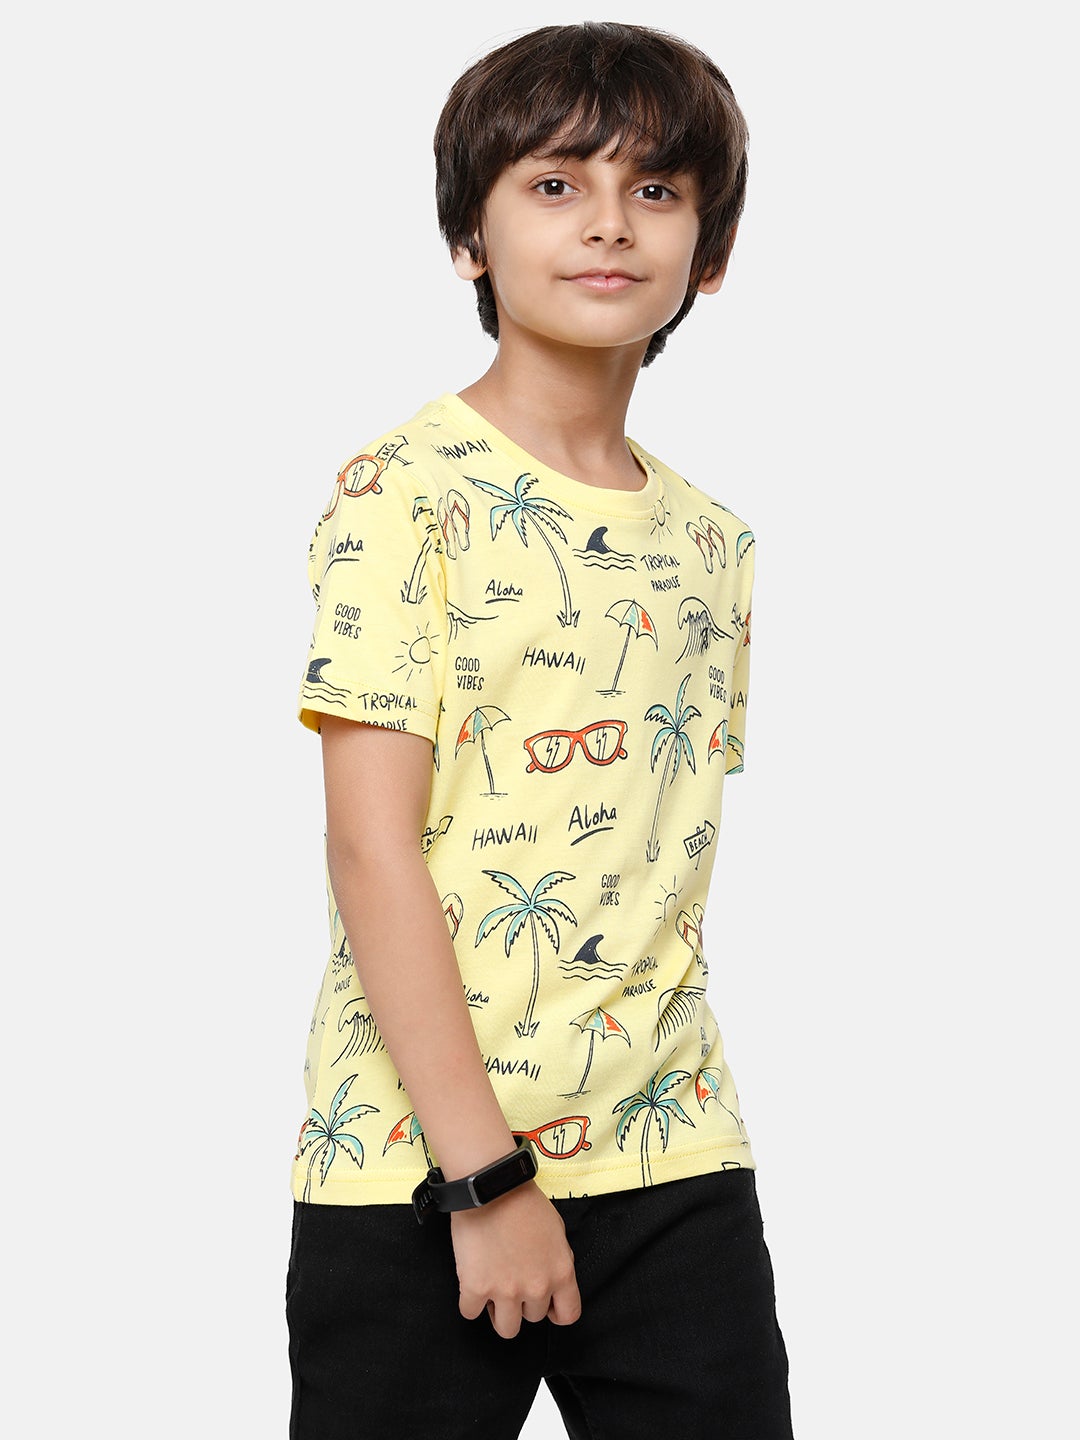 CP Boys Slim Fit Yellow Printed Round Neck T-Shirt T-shirt Classic Polo 